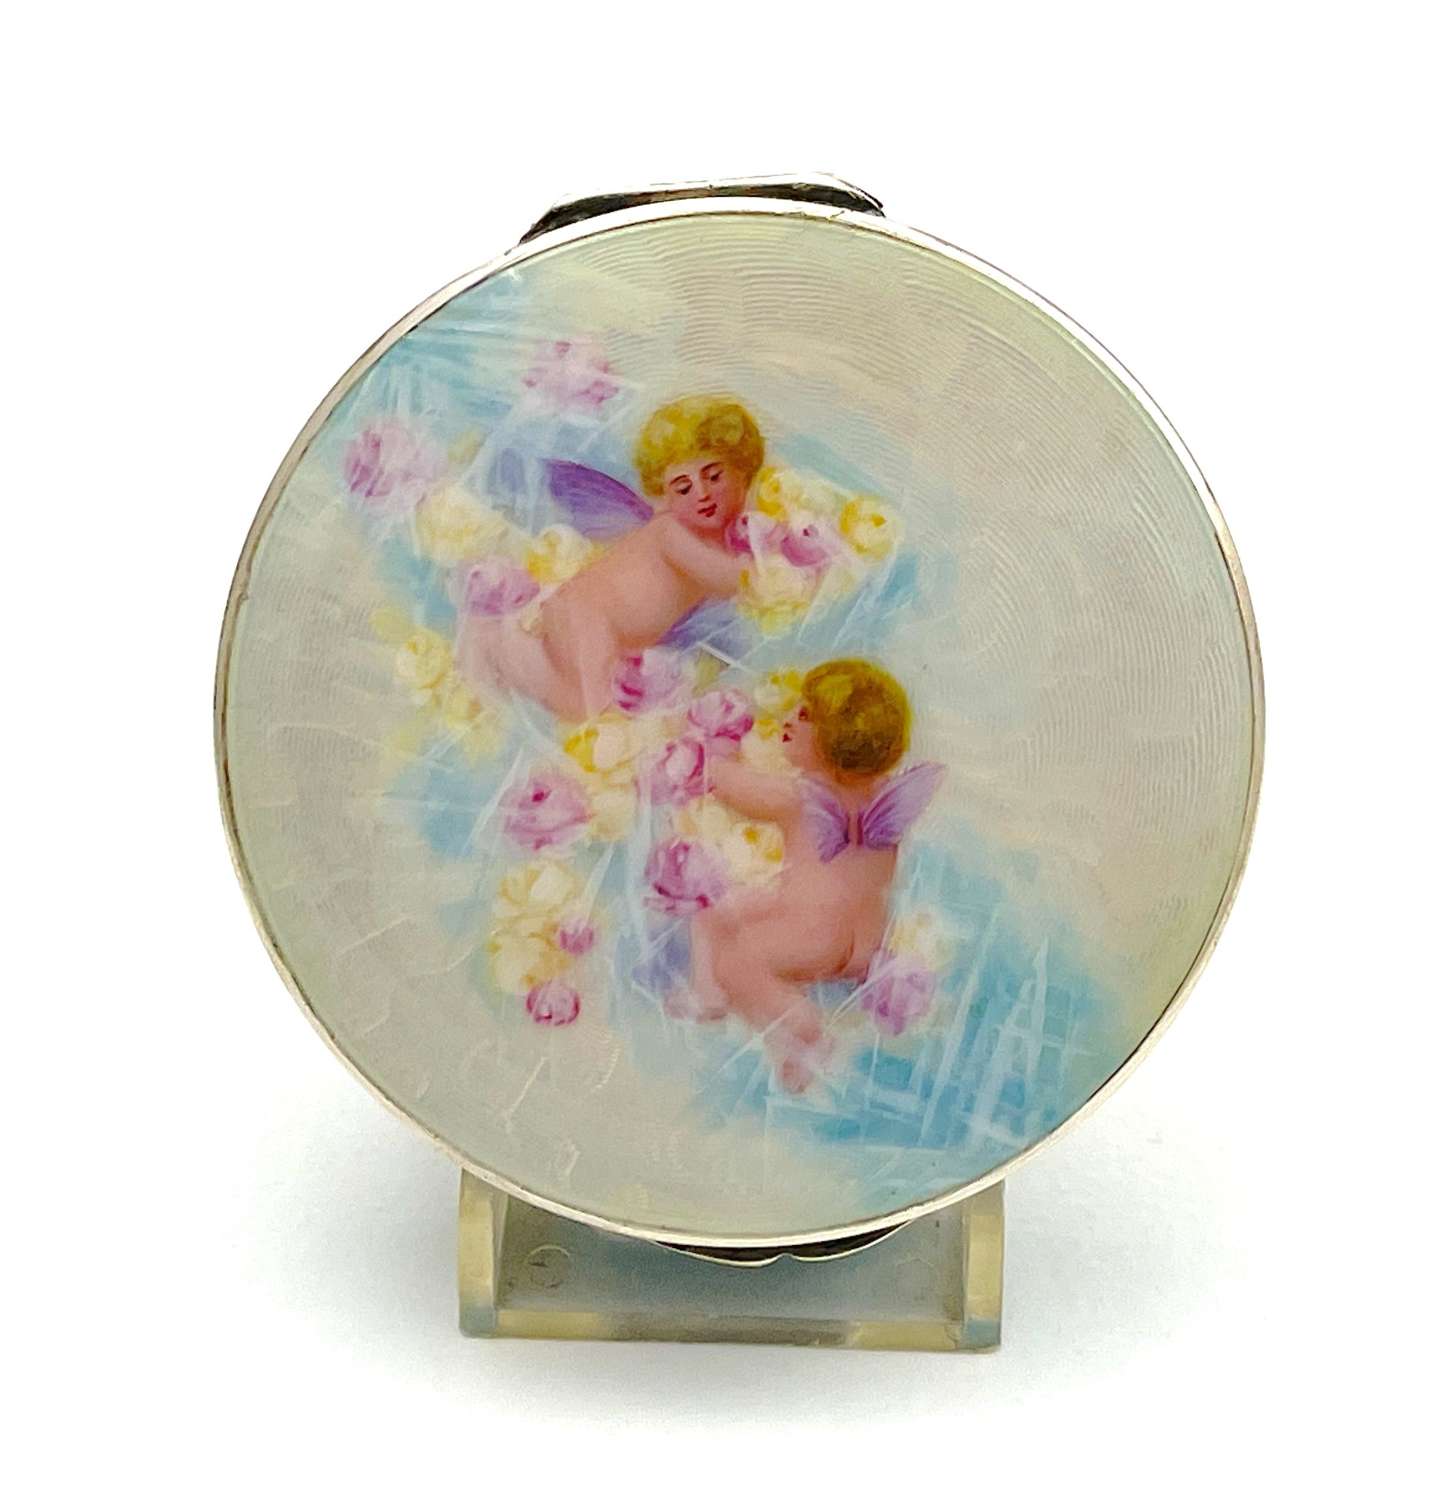 A Charming Antique Enamel and Silver Box Decorated with Cherubs